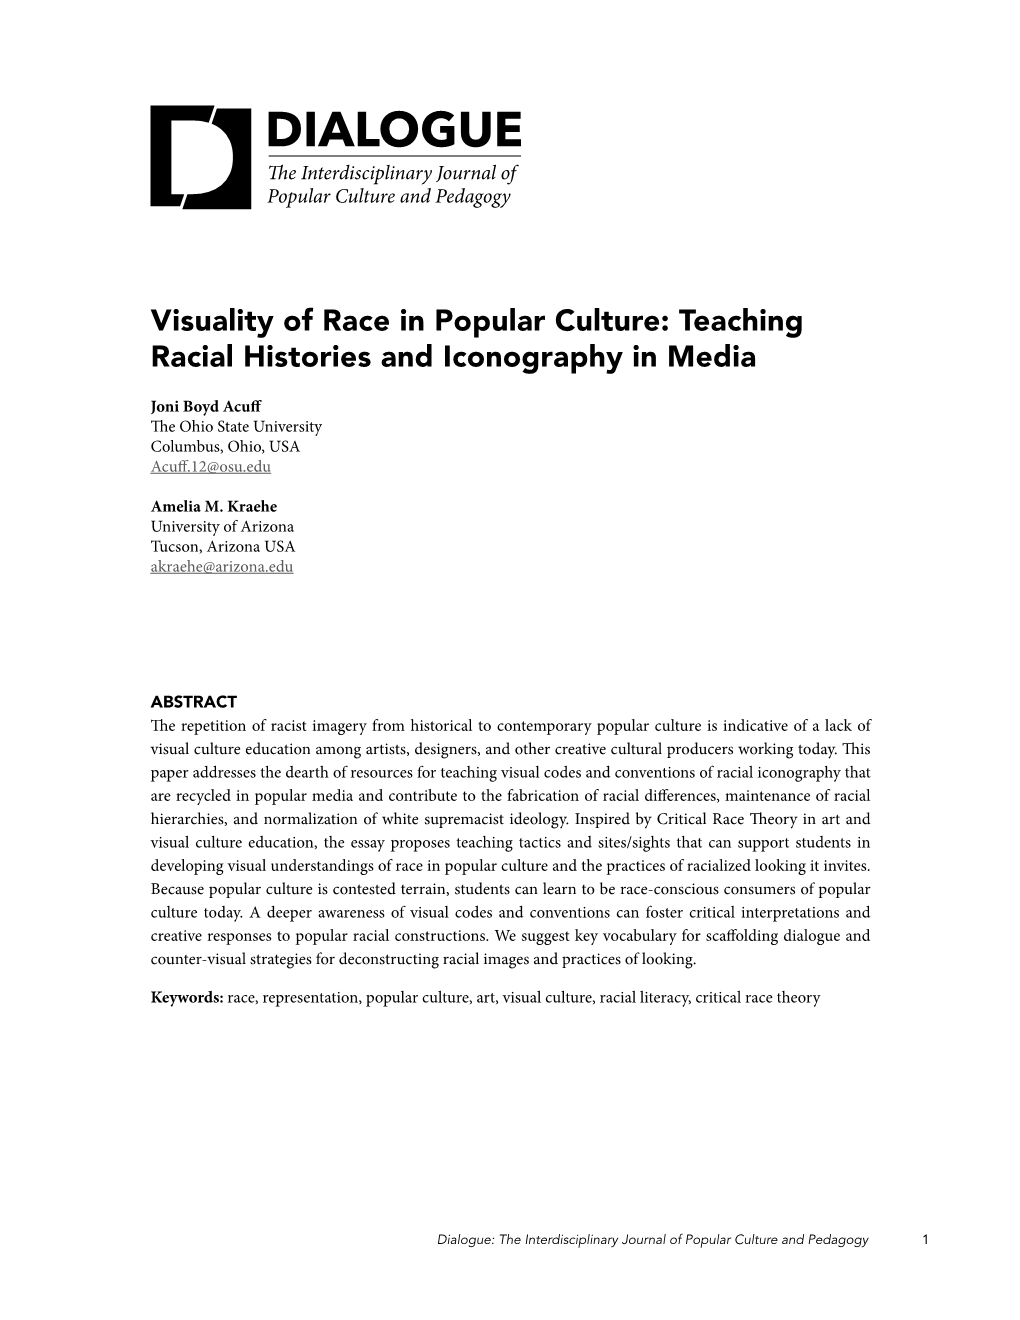 Visuality of Race in Popular Culture: Teaching Racial Histories and Iconography in Media